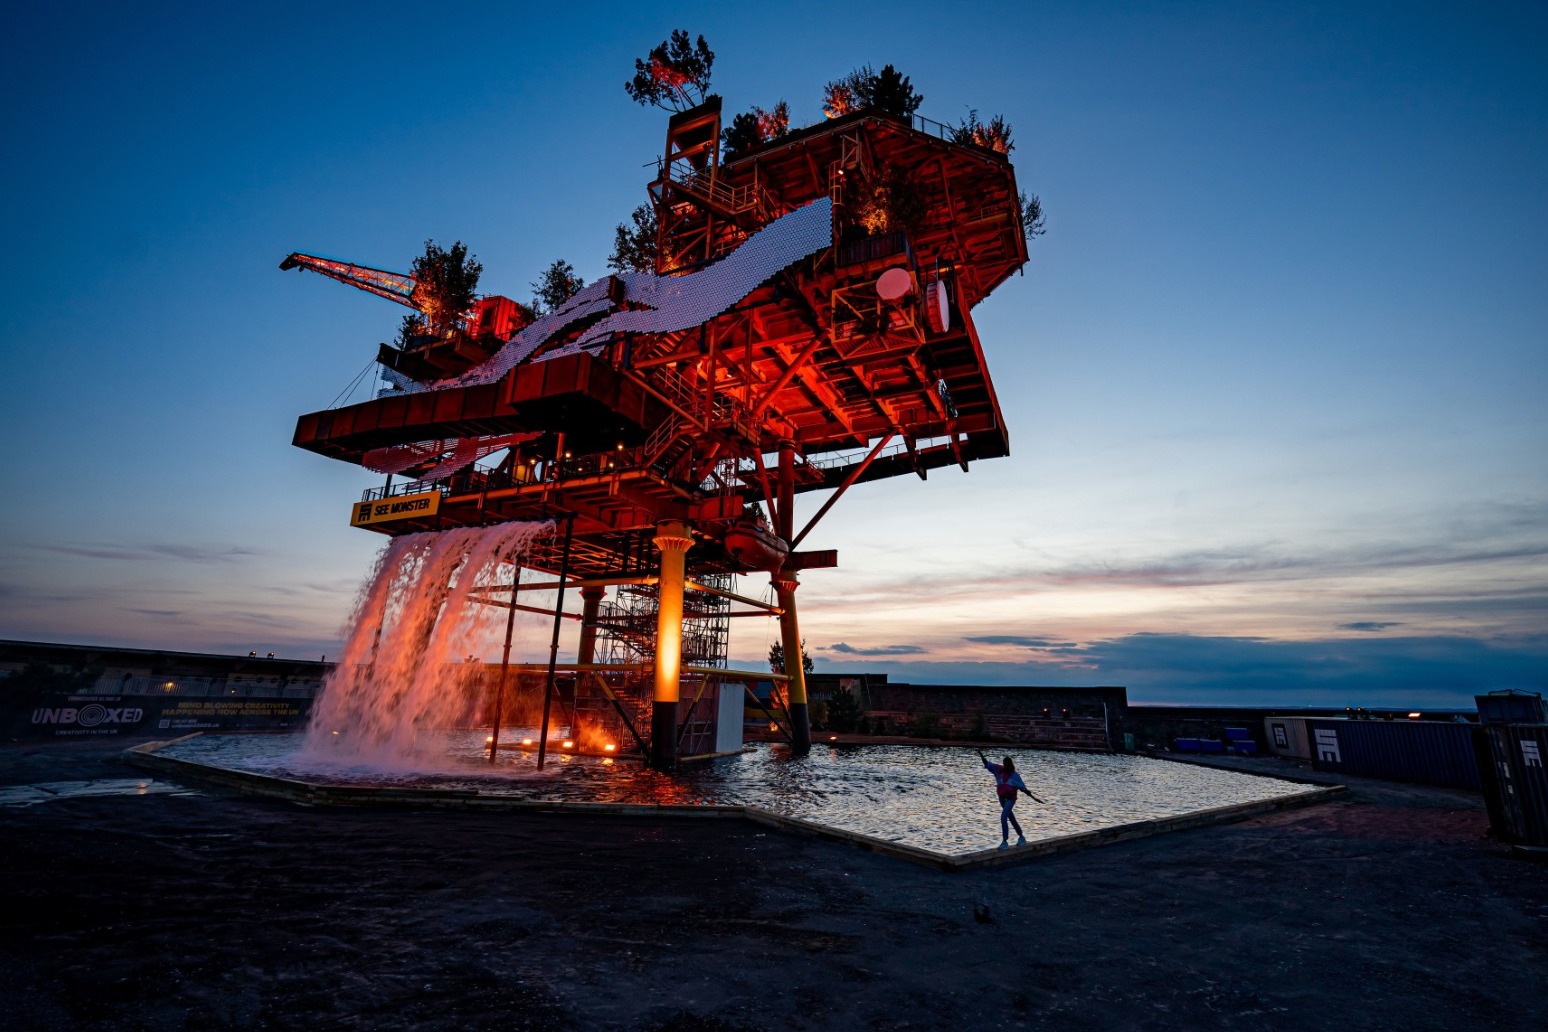 Decommissioned oil rig to reopen as public art installation 